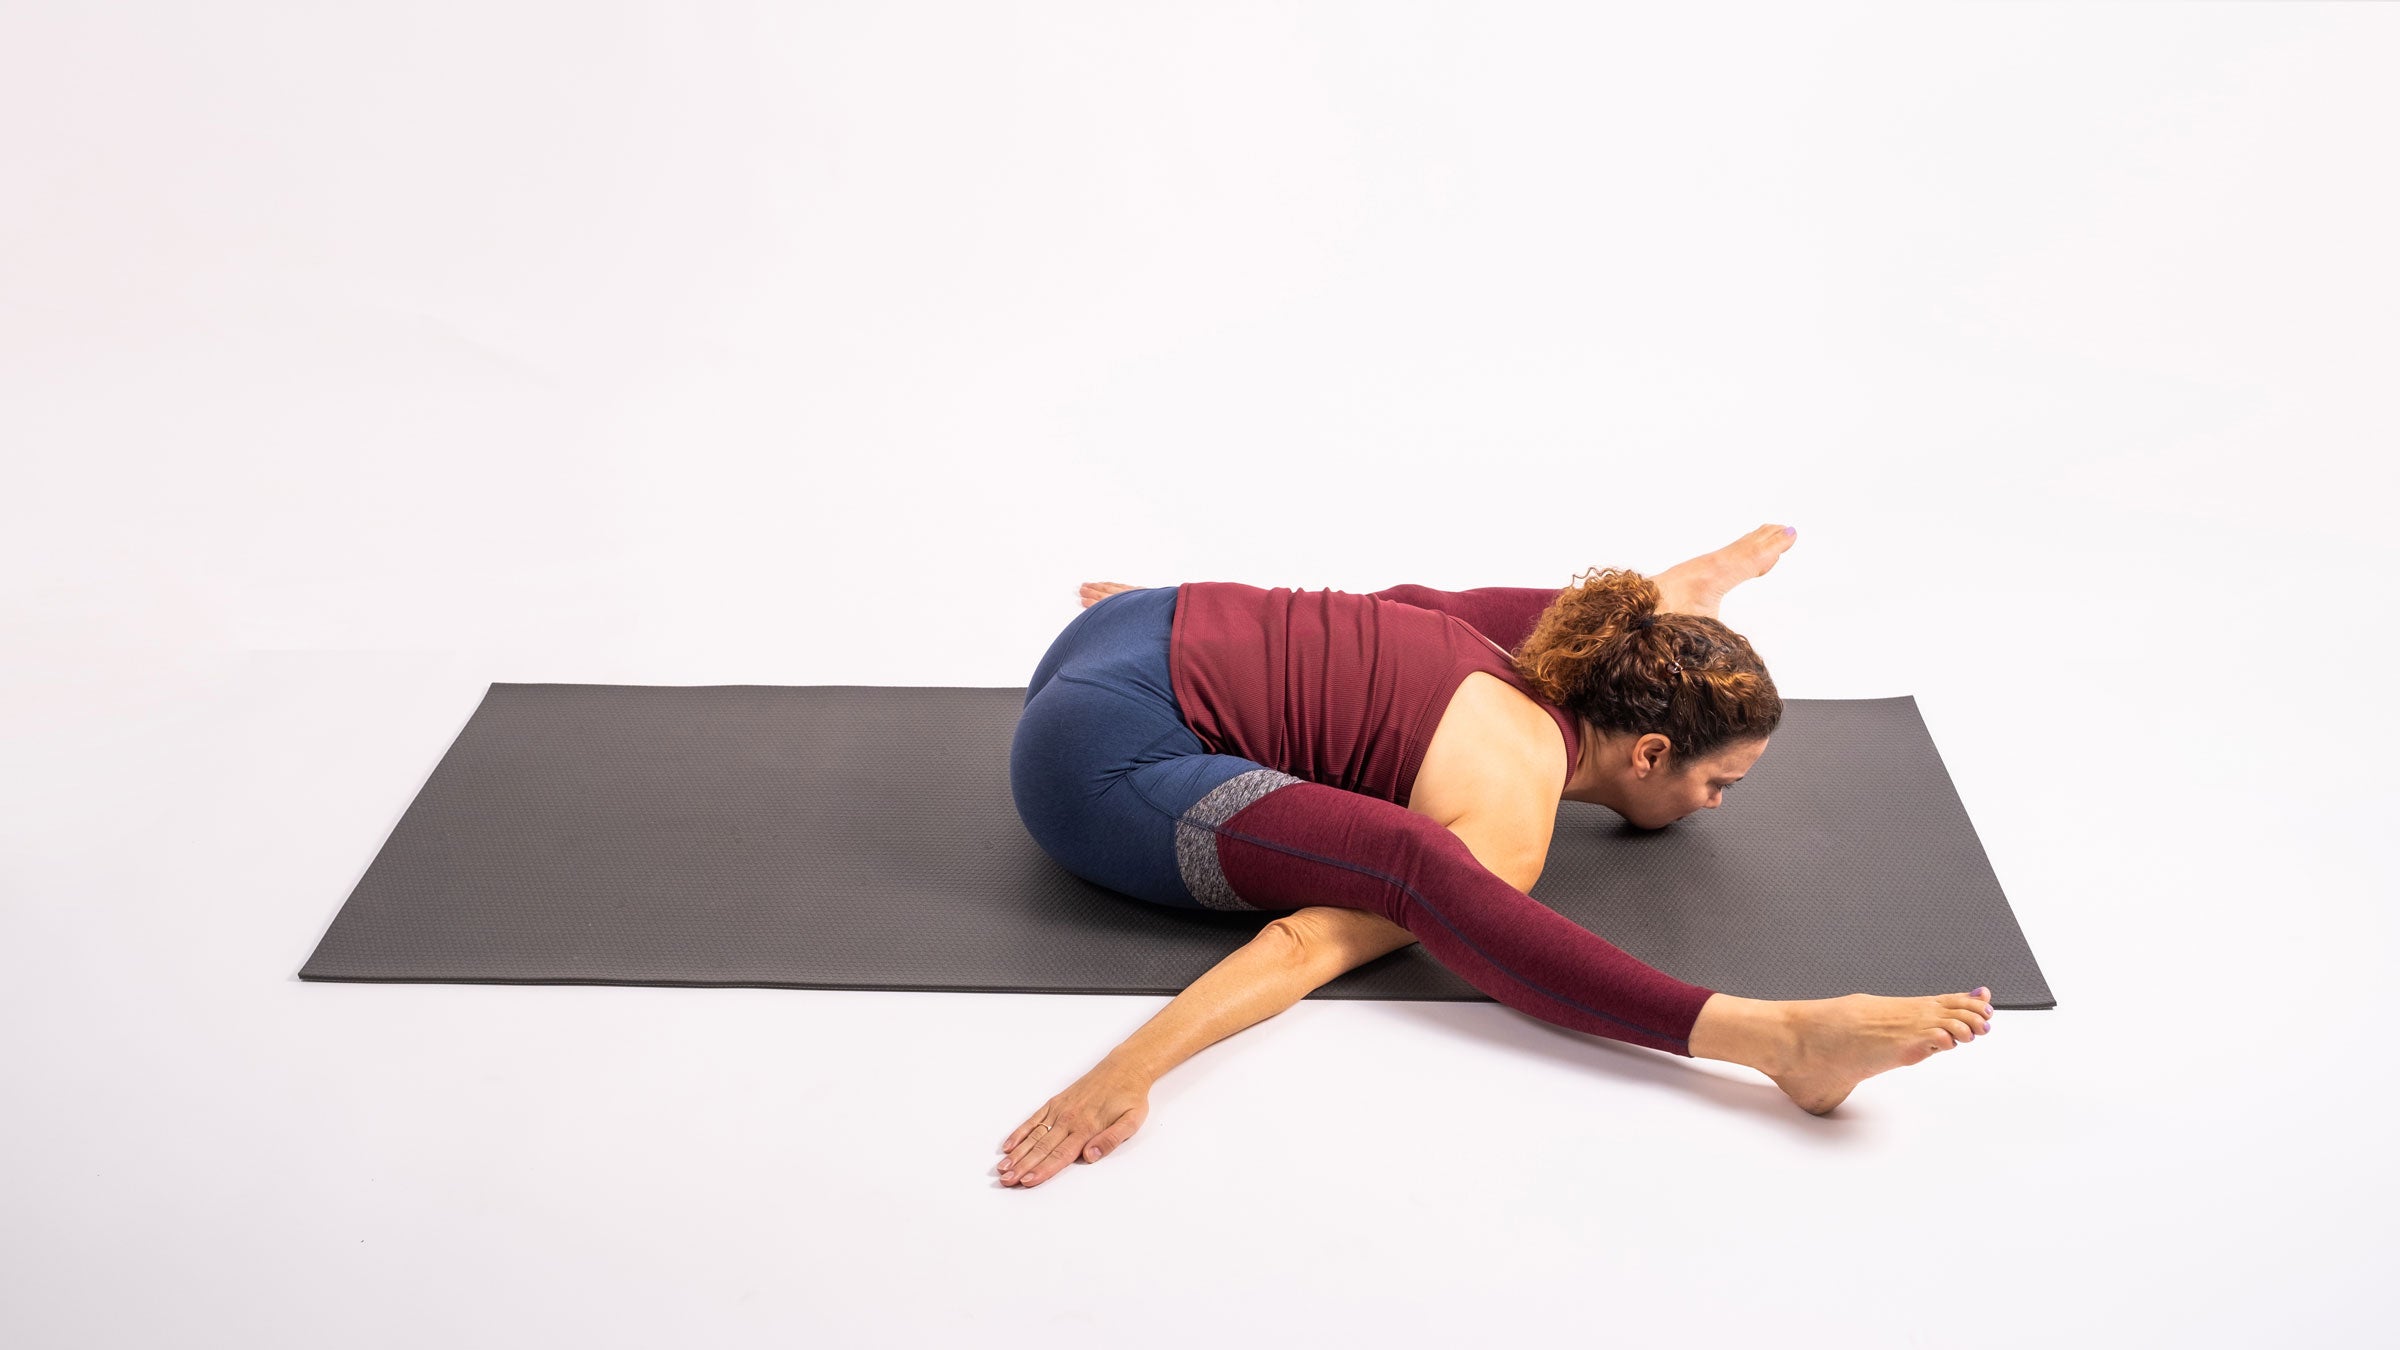 How to prep for compass: stretches for the hamstrings, hips, and side –  everyday namaste!